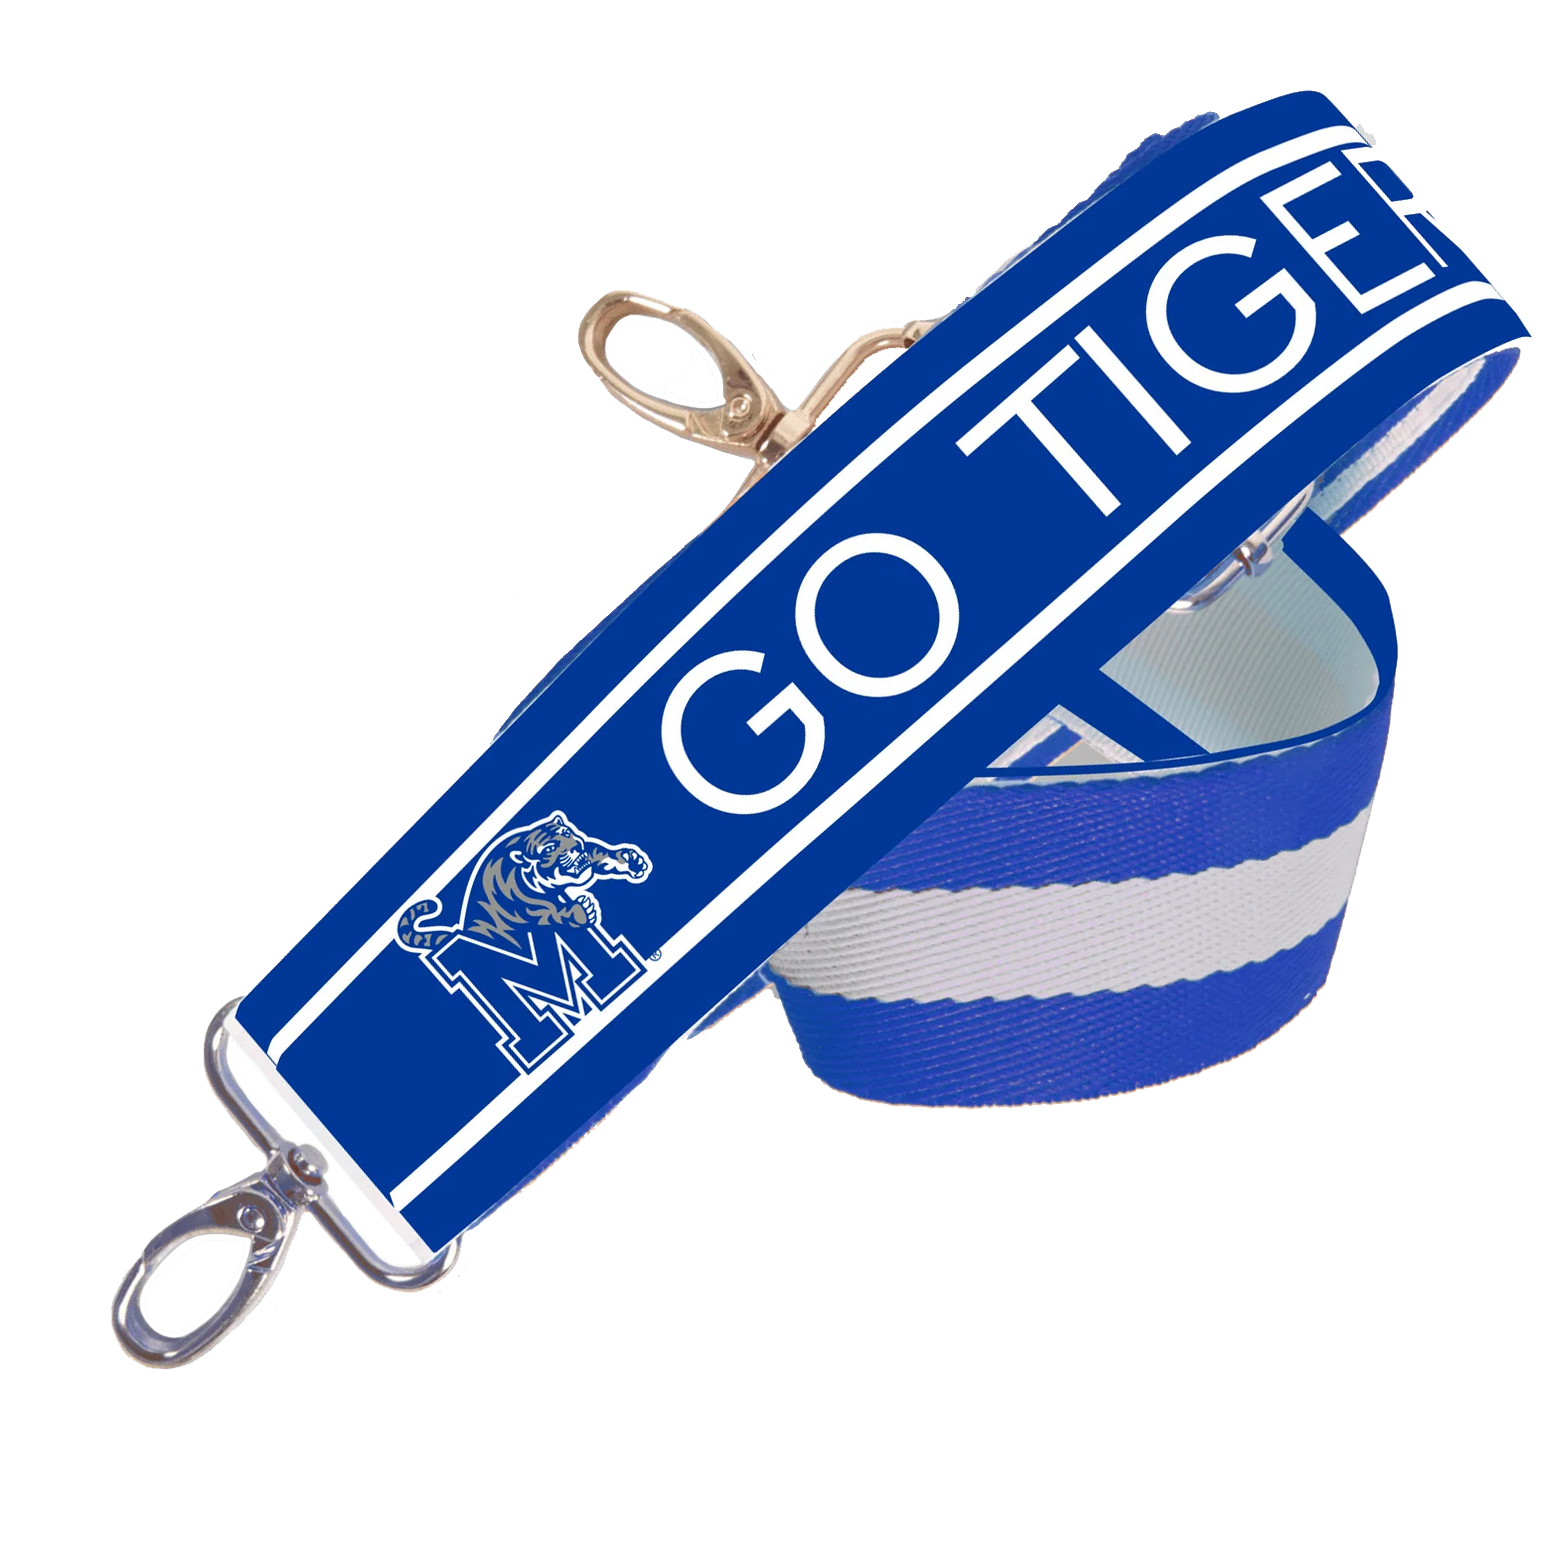 MEMPHIS 1.5" - Officially Licensed - Stripe